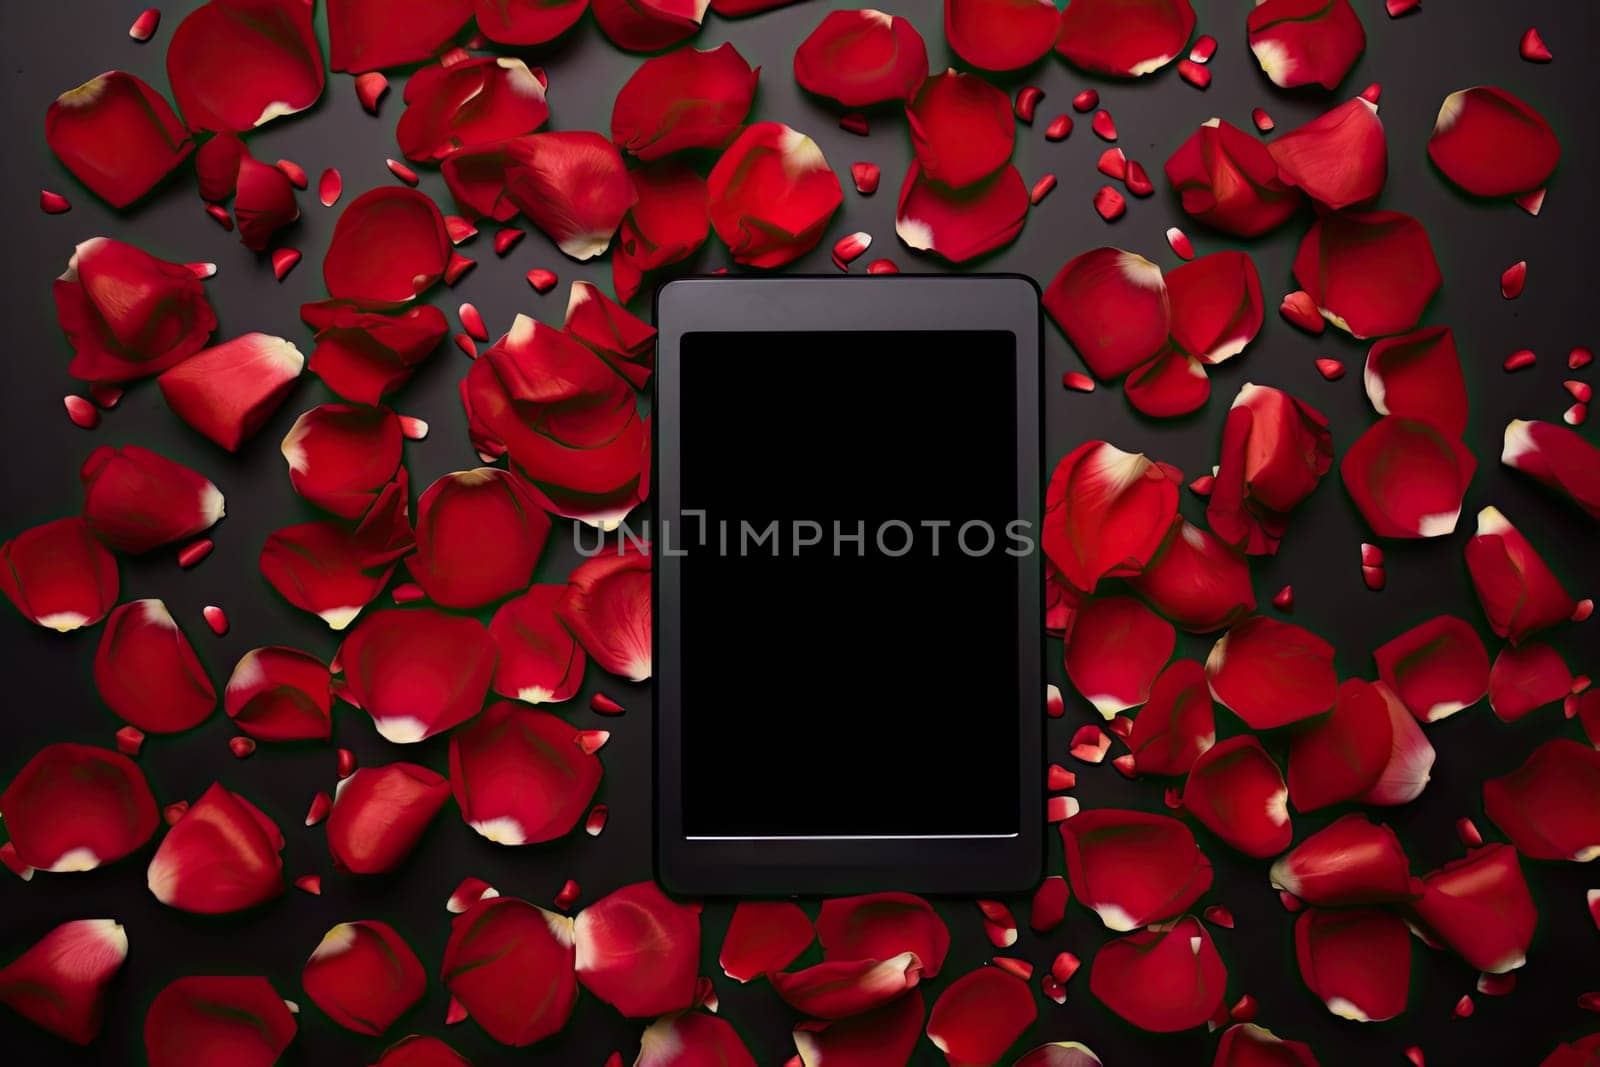 A cell phone surrounded by rose petals by golibtolibov